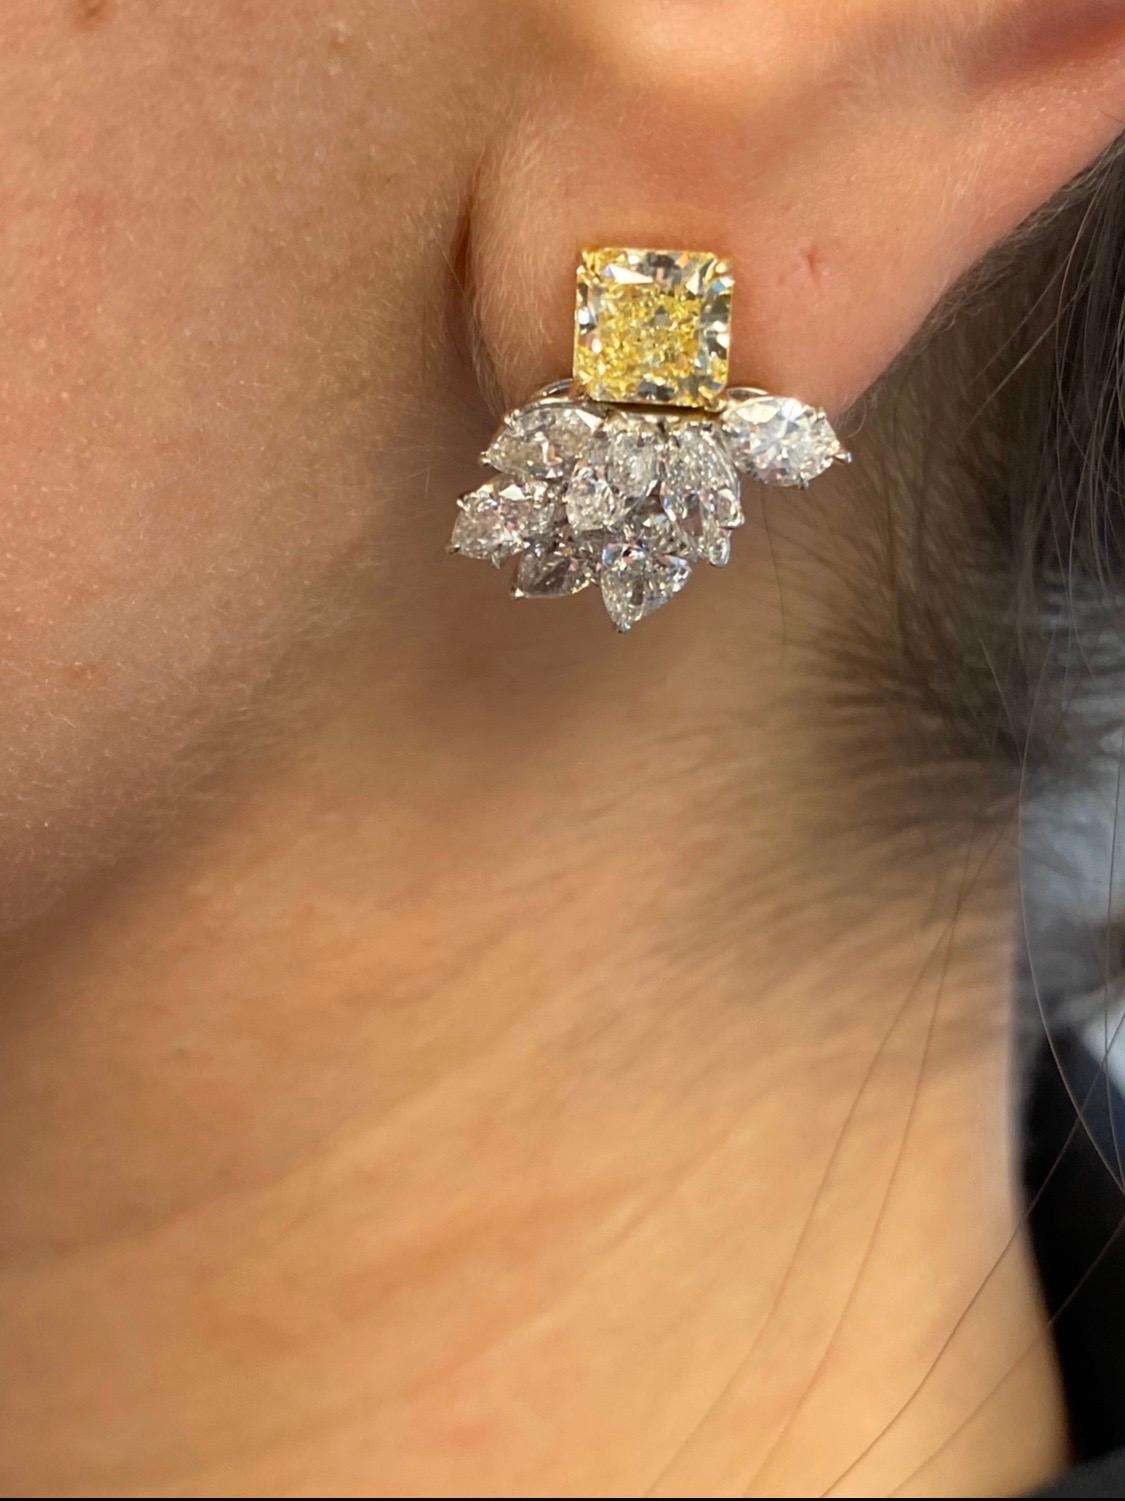 Spectacular earrings featuring GIA Certified 1.29 Carat and 1.30 carat Fancy yellow square cut diamonds. 
Square cut diamonds are cherished for their remarkable brilliance and beauty. The astonishingly cut and amazingly beautiful stones used in this